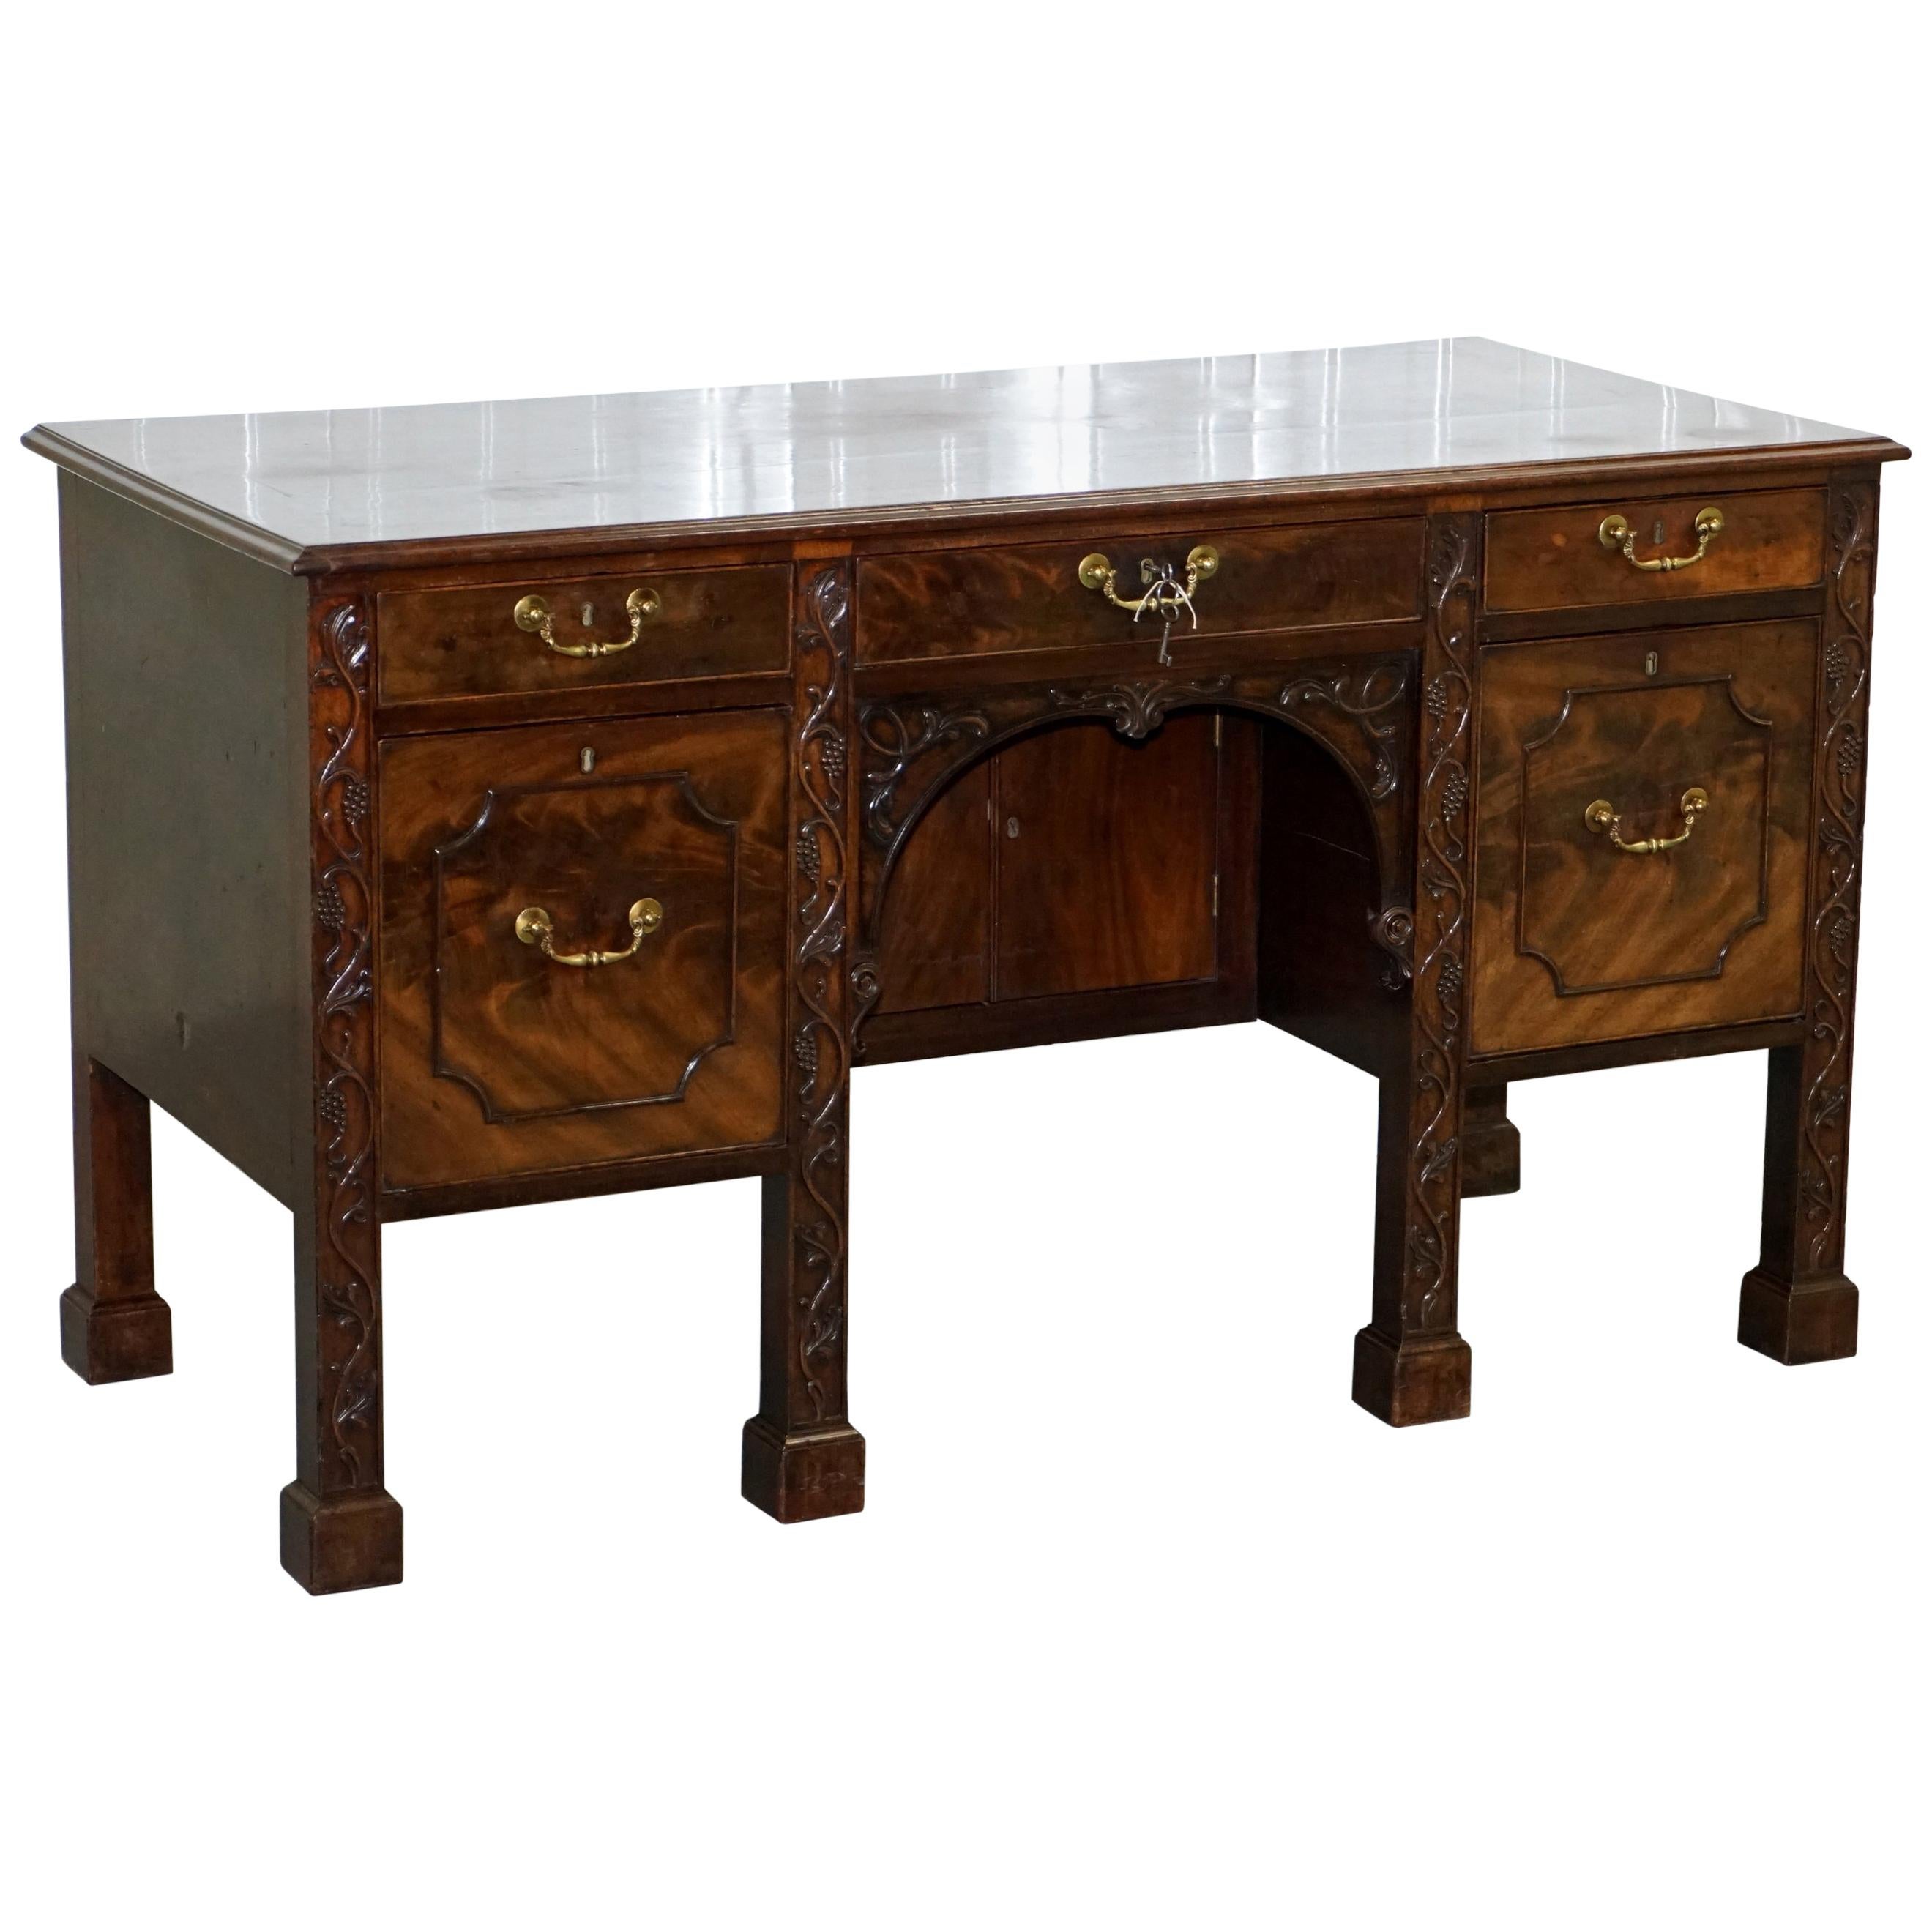 Viscountess Boyd's Ince Castle Seltenes George III Hartholz Sideboard Chippendale im Angebot